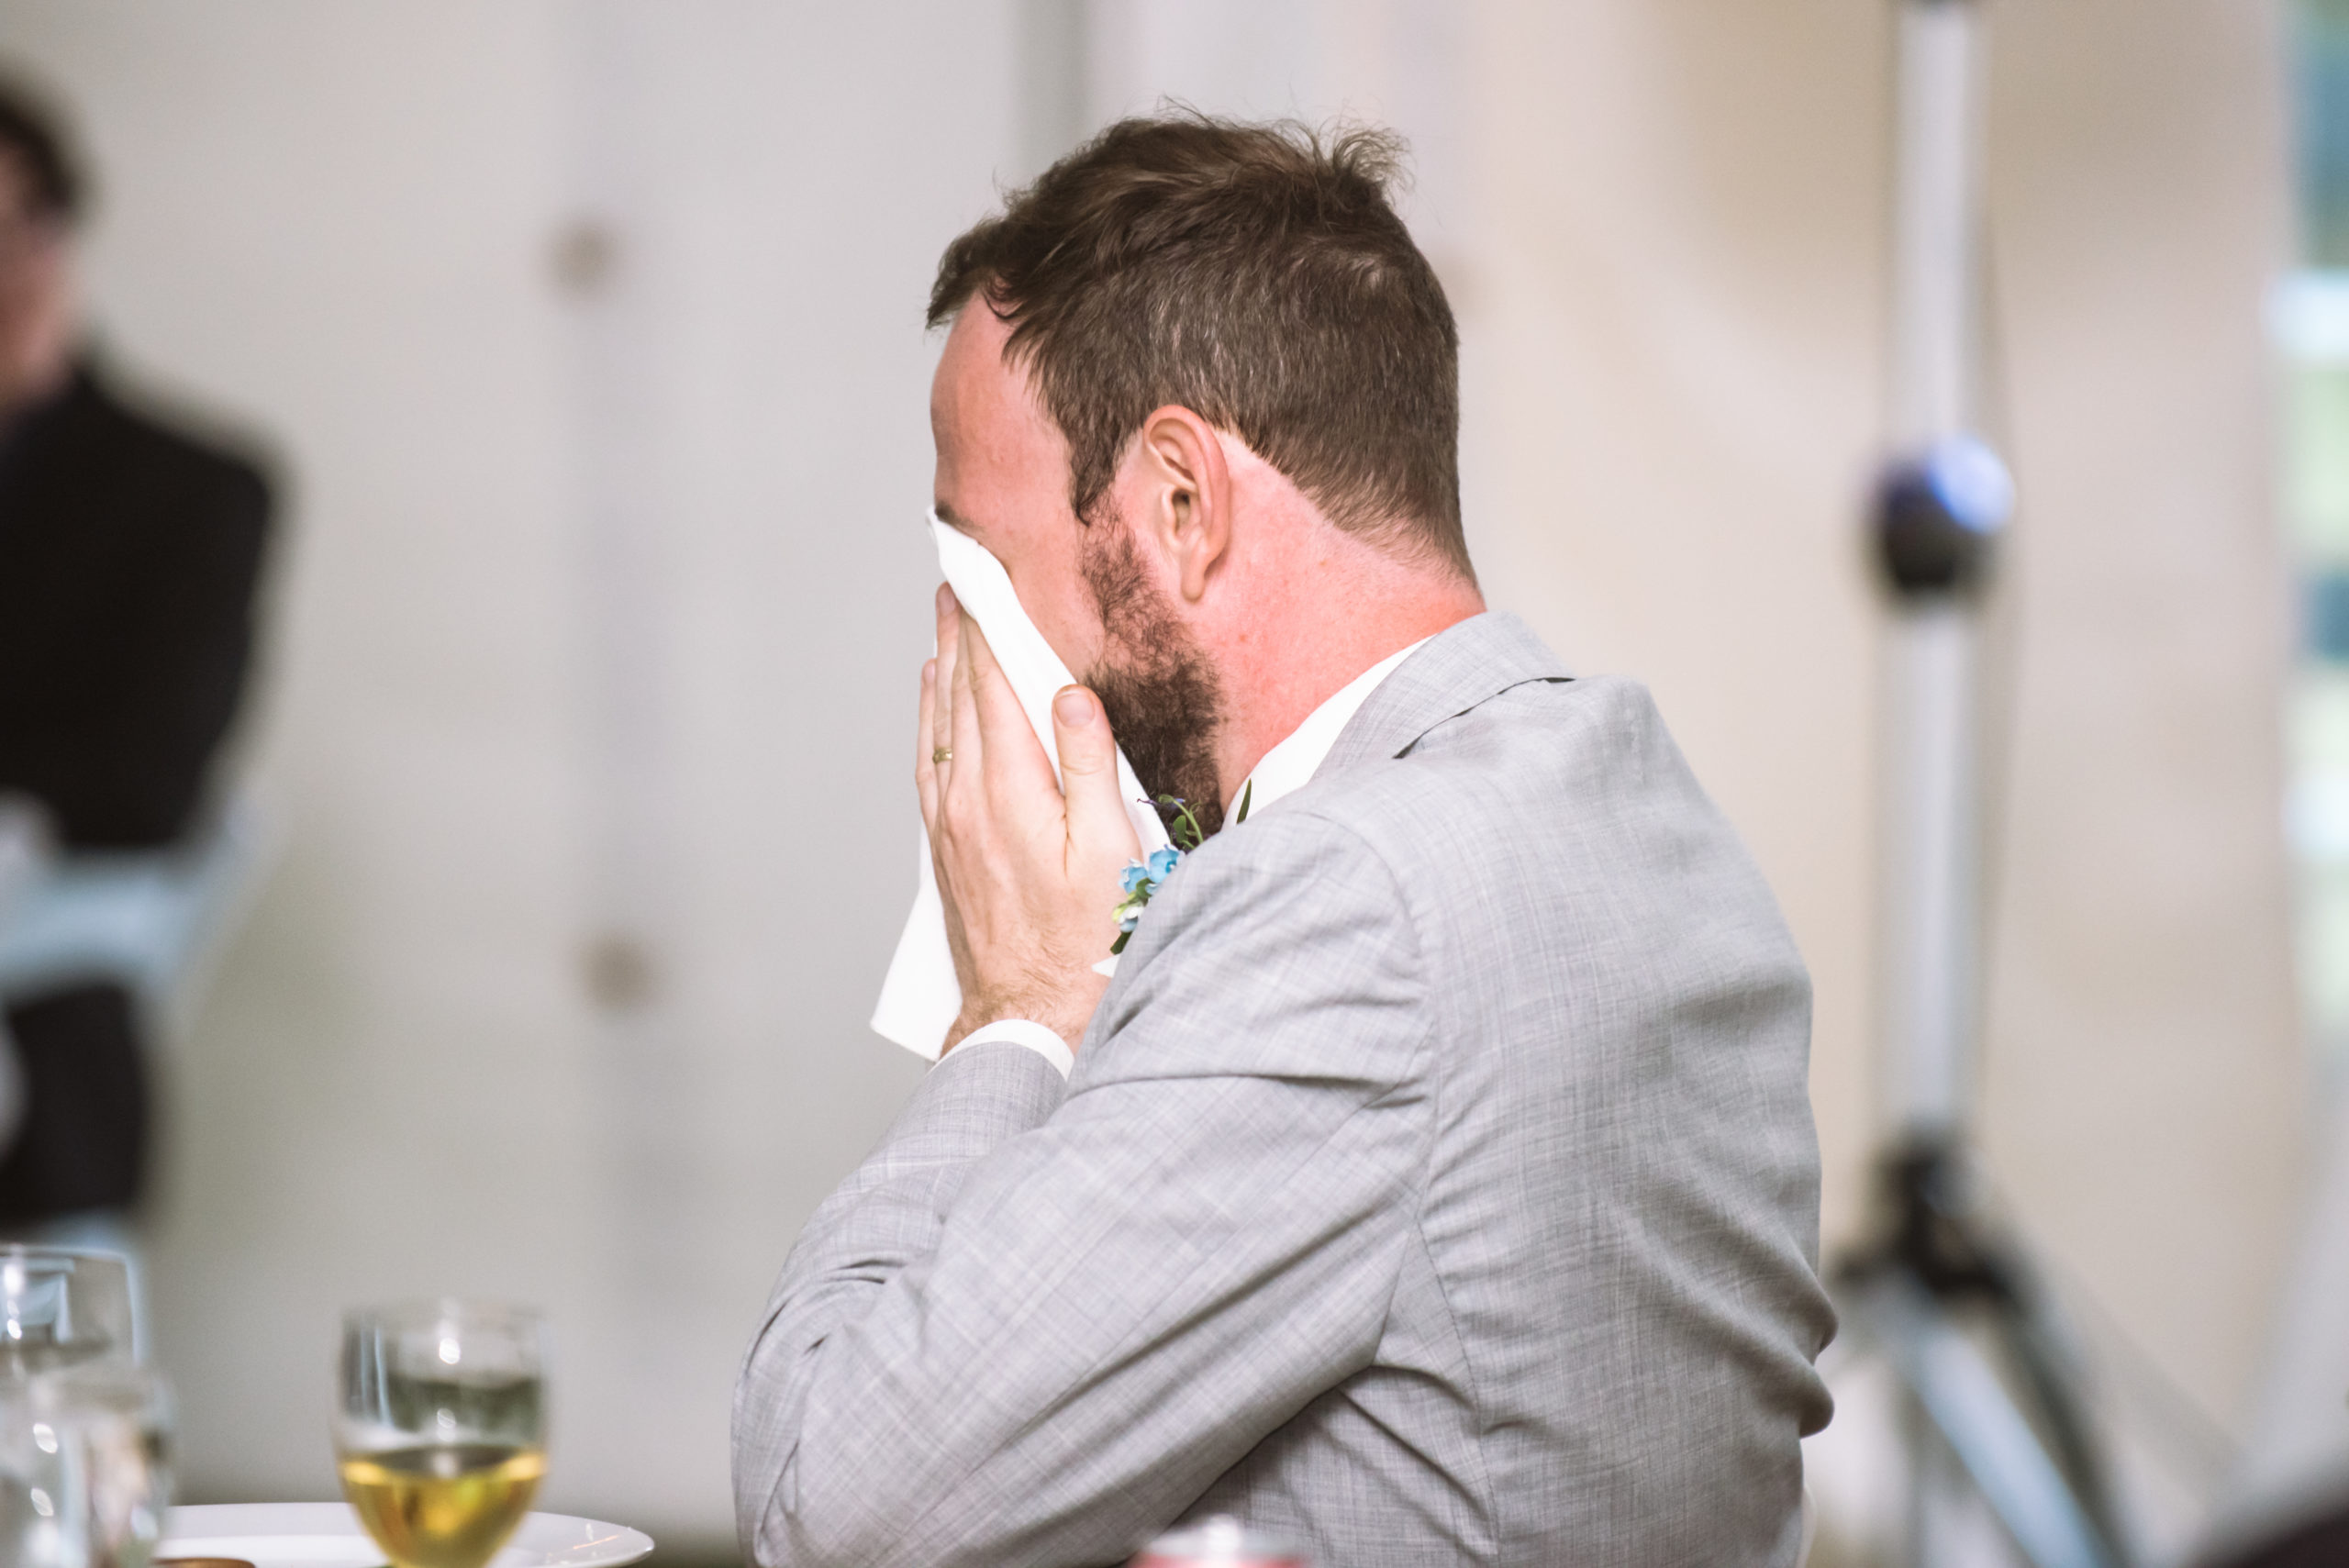 The groom holding a white napkin up to his face from tearing up at a speech during the reception.